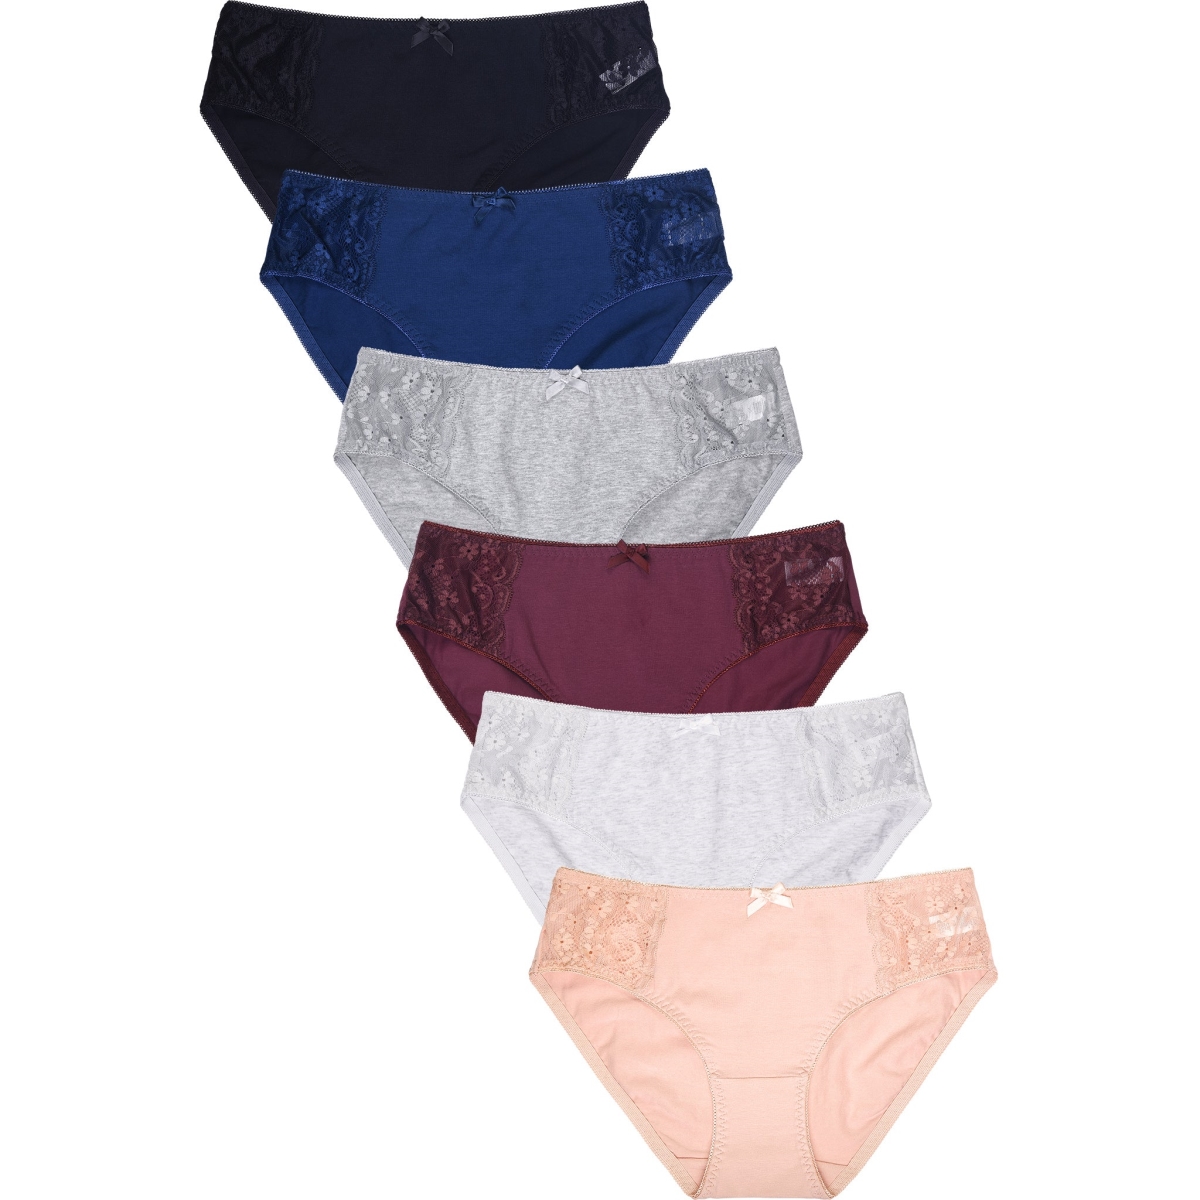 Picture of 247 Frenzy 247-LP1426CK-SM Sofra Womens Essentials Cotton Stretch Bikini Panty Underwear - Assorted Color - Small - Pack of 6